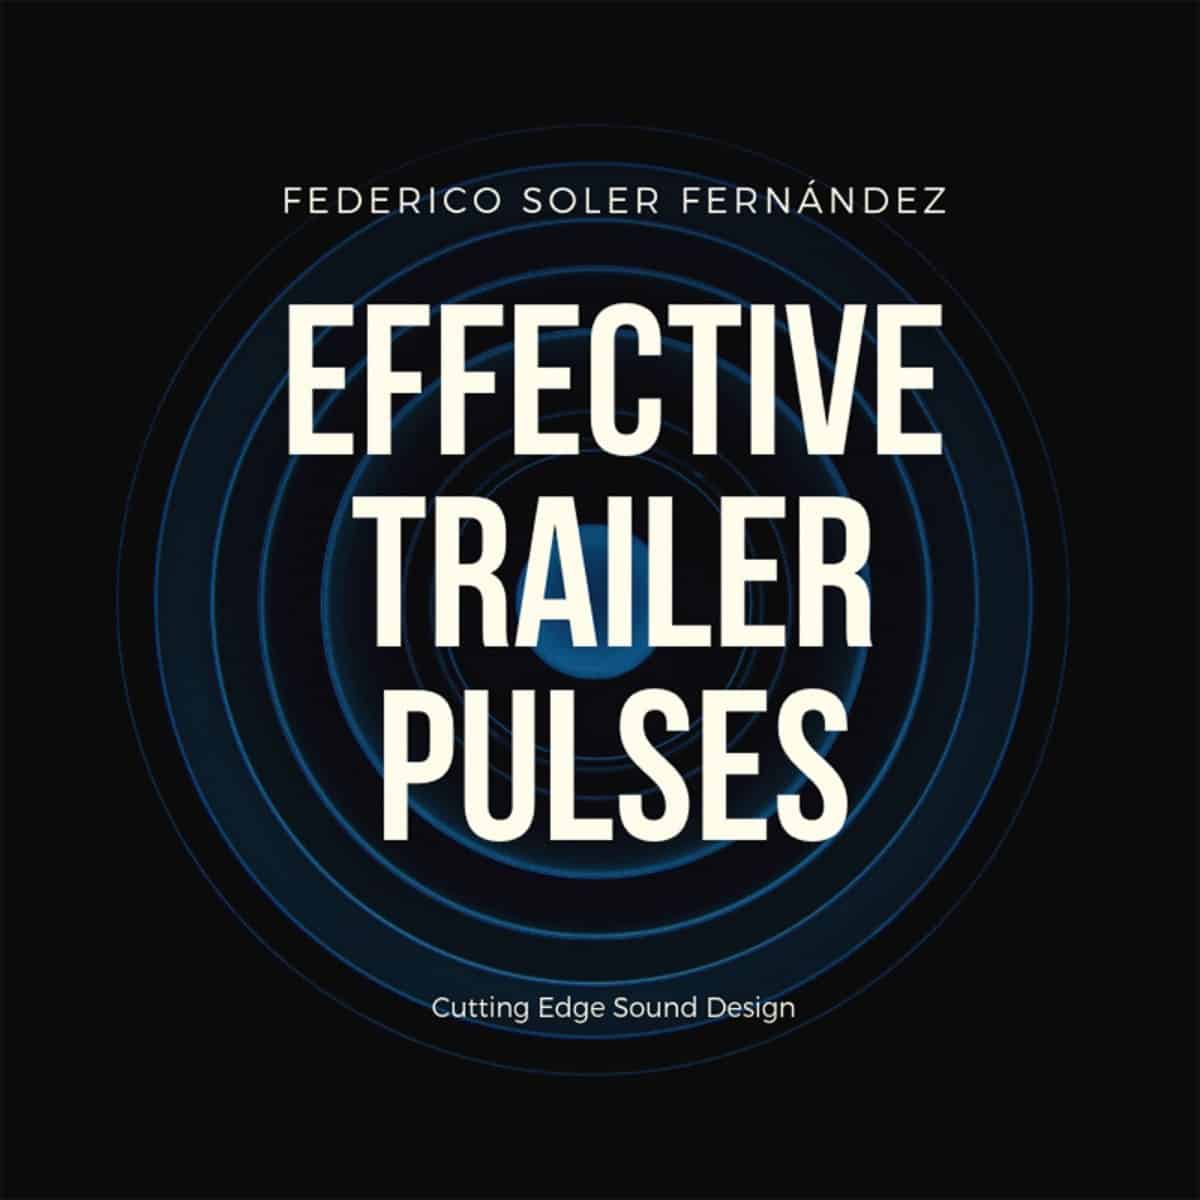 Effective Trailer Pulses Cover c5a8c6